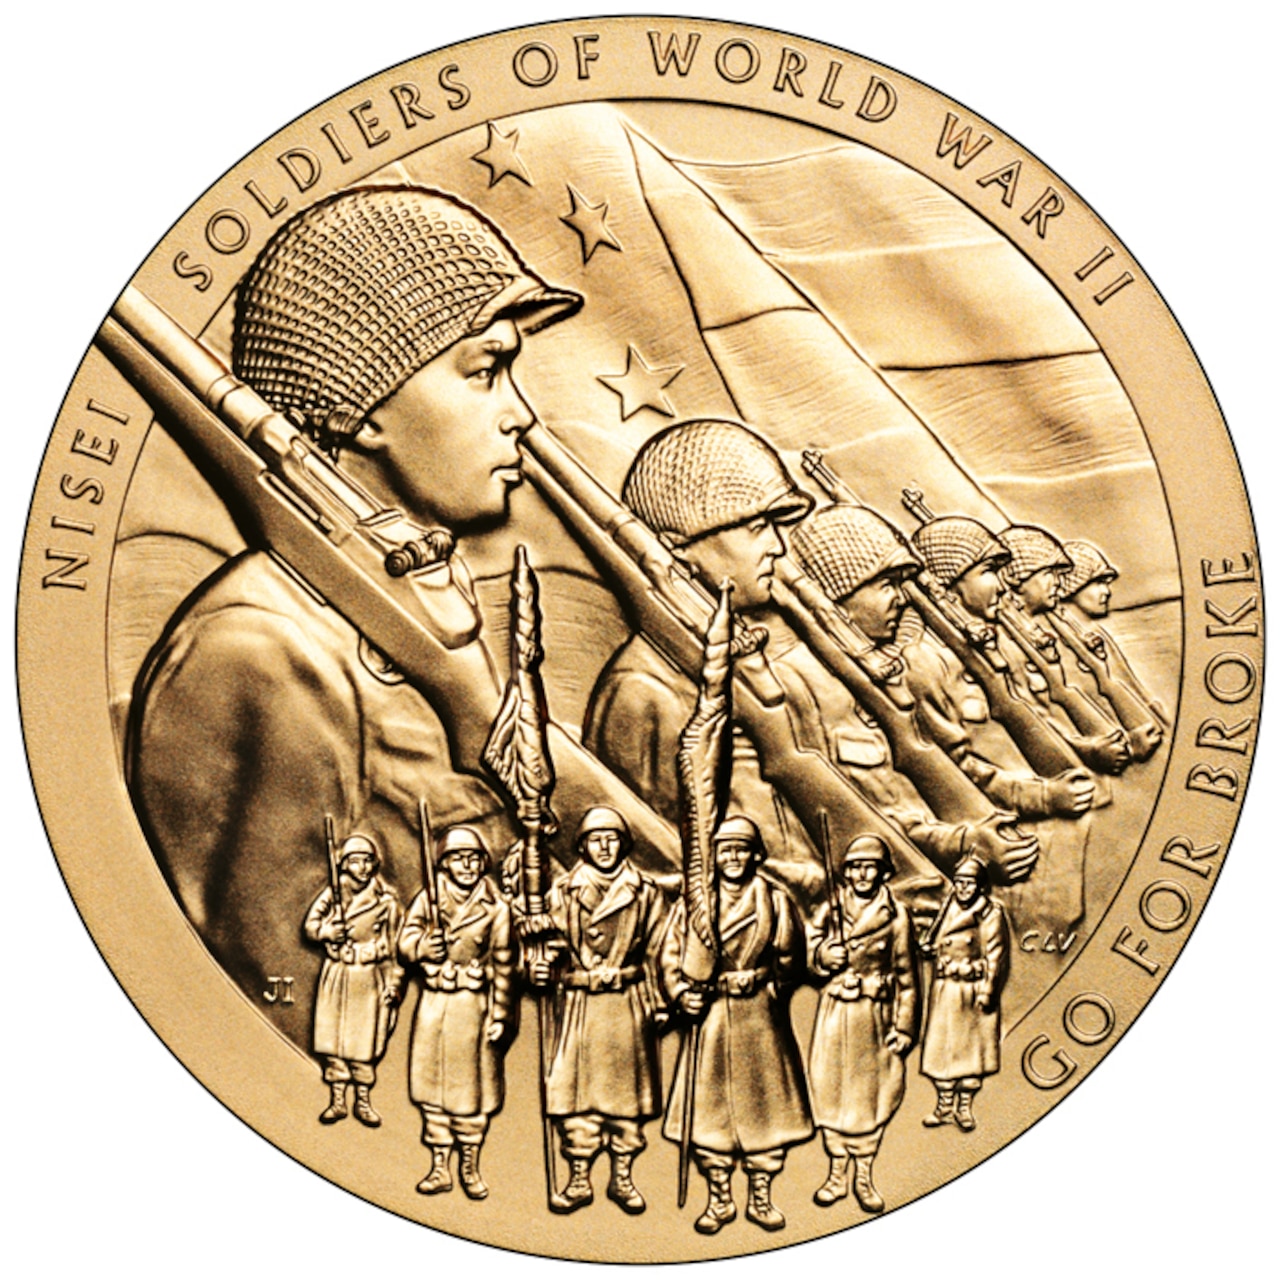 A gold medal with the image of Japanese American World War II soldiers and the words “Nisei soldiers of World War II Go for Broke”